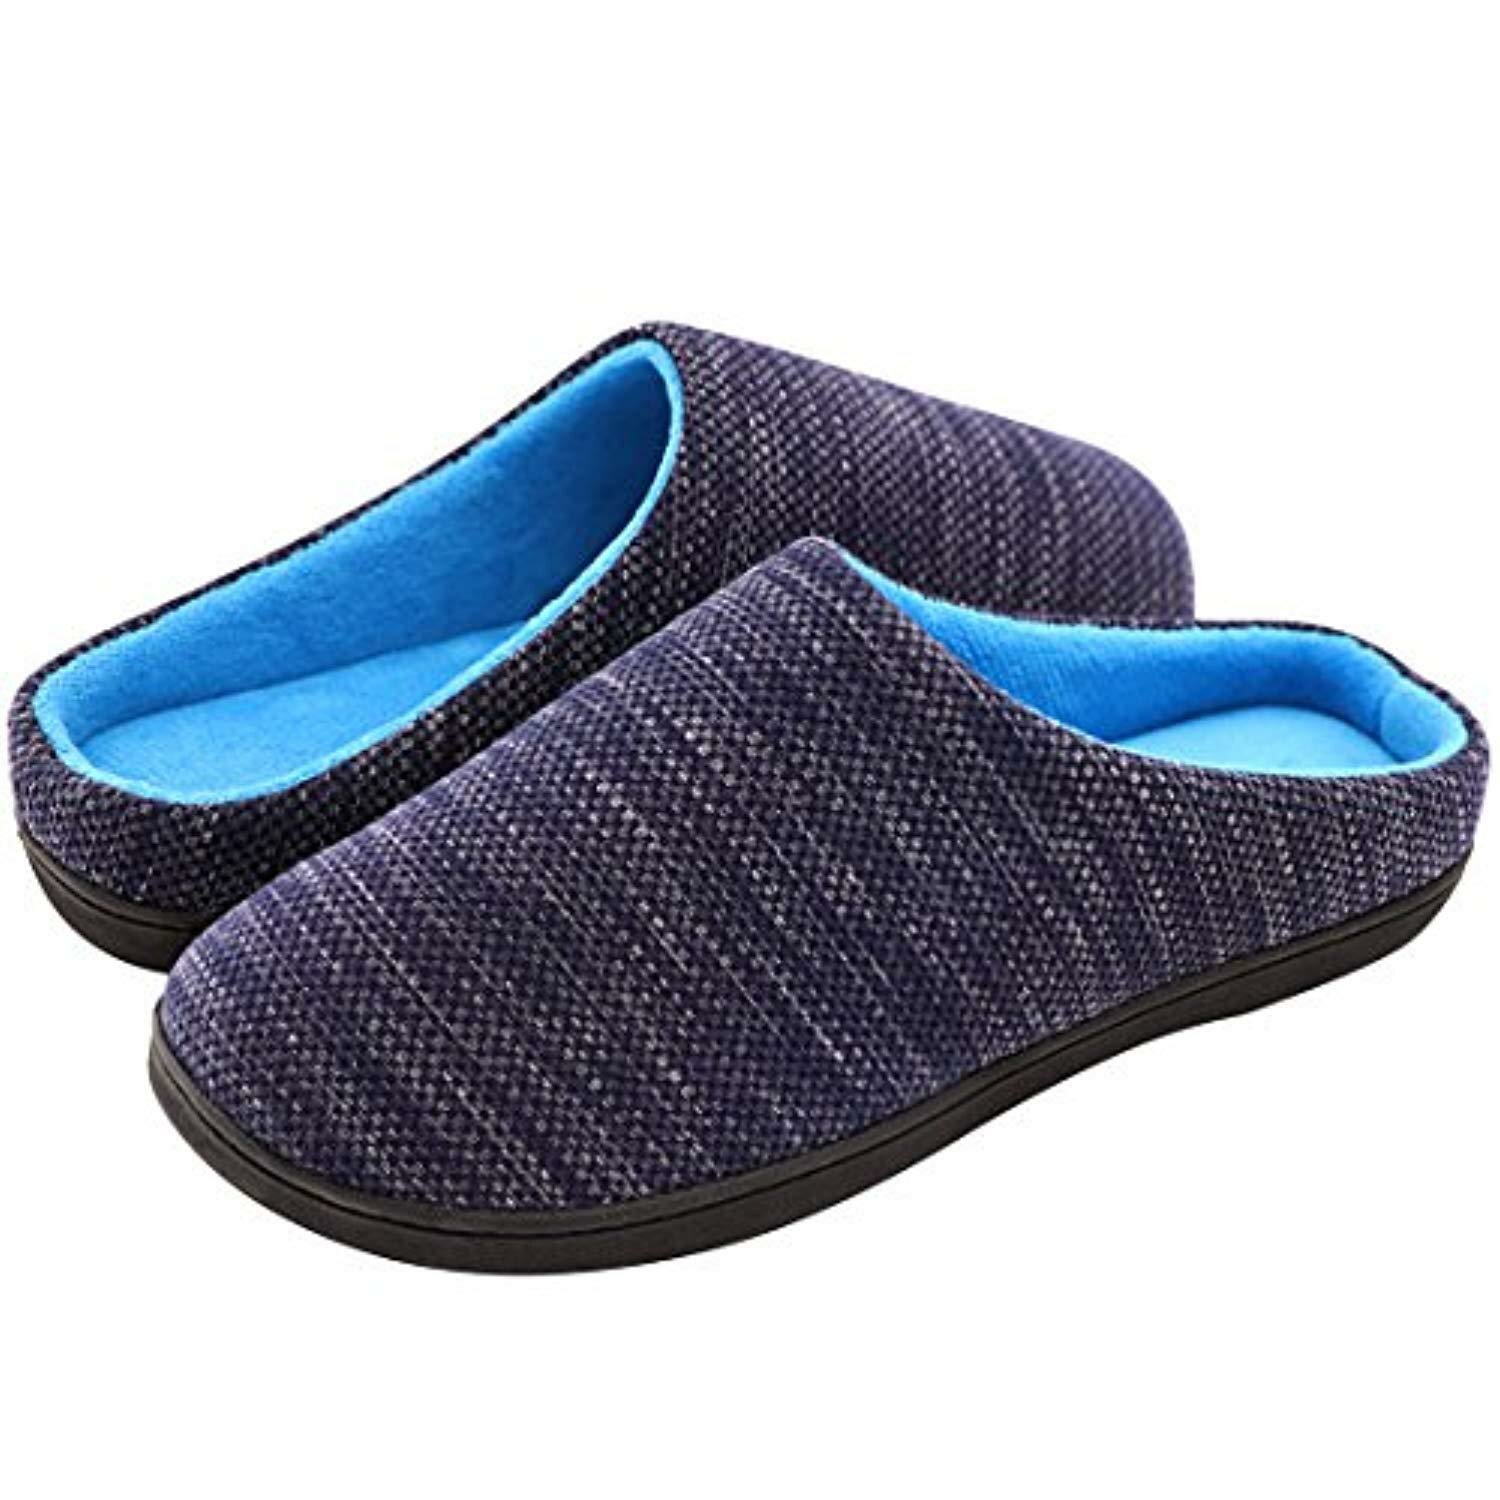 Mens Comfy House Slippers Slip On Bedroom Shoes